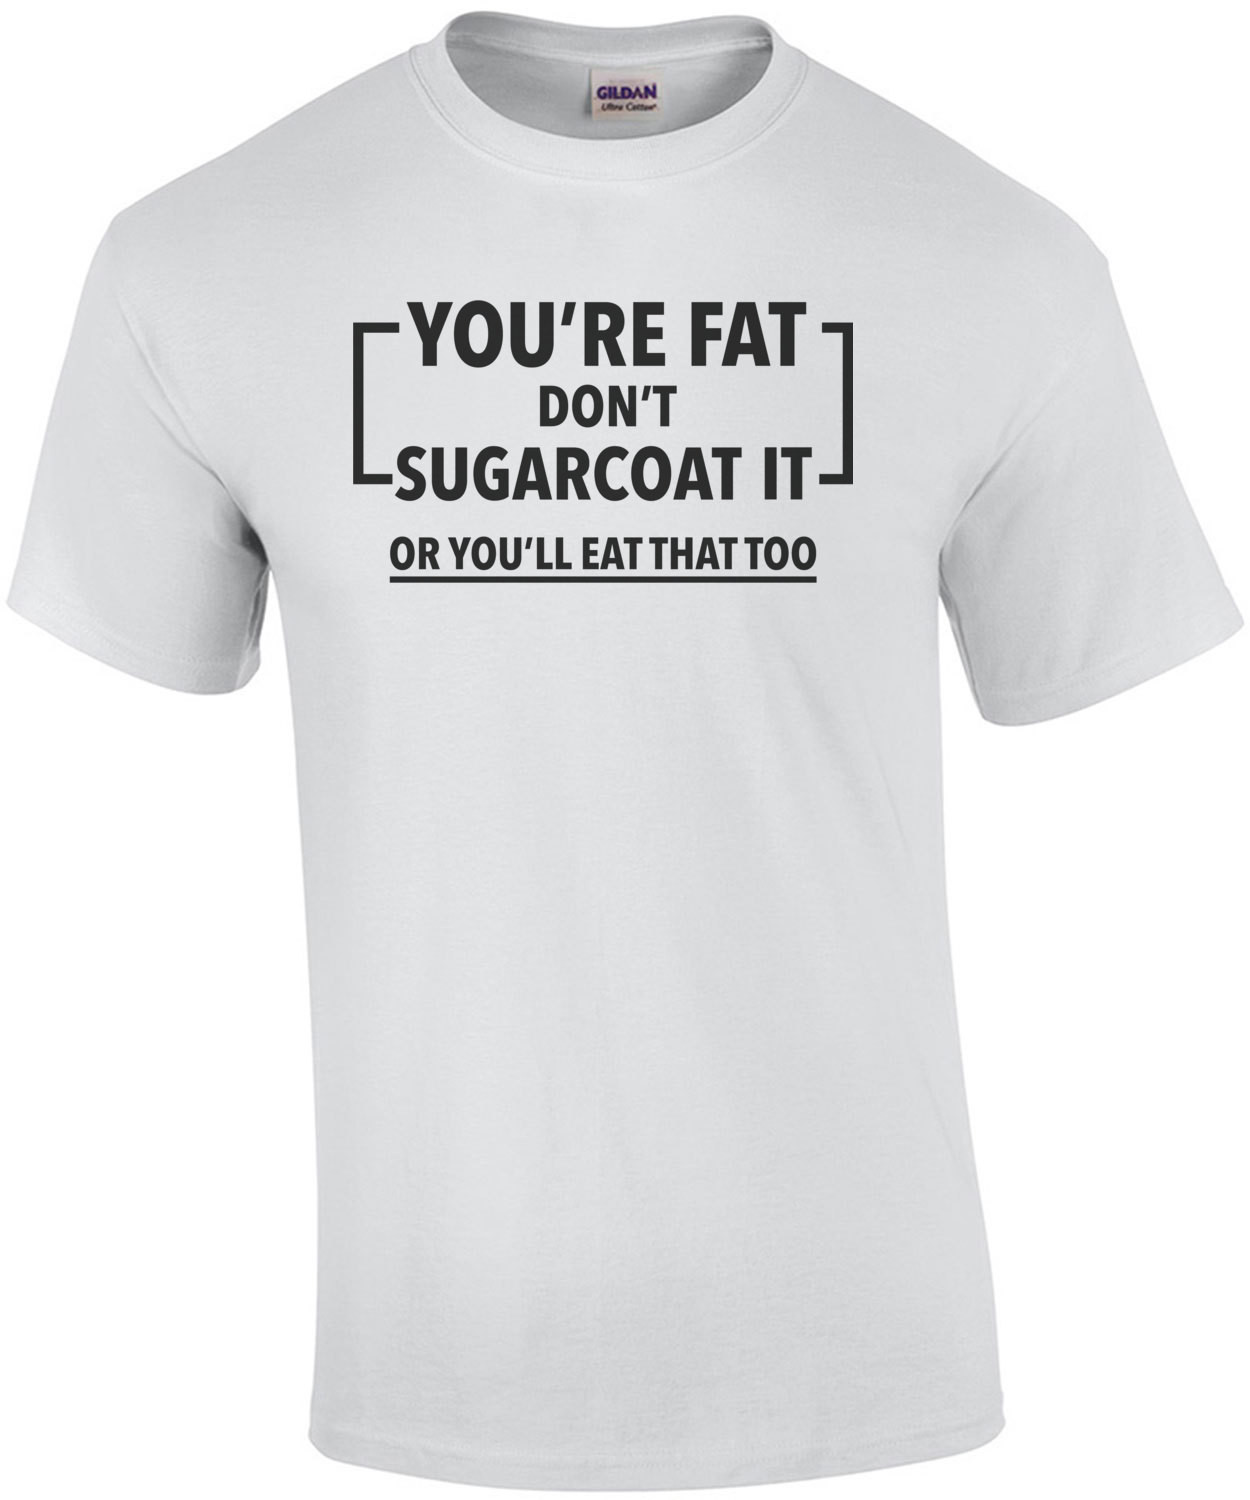 You're Fat Don't sugarcoat it or you'lll eat that too - funny fat t-shirt